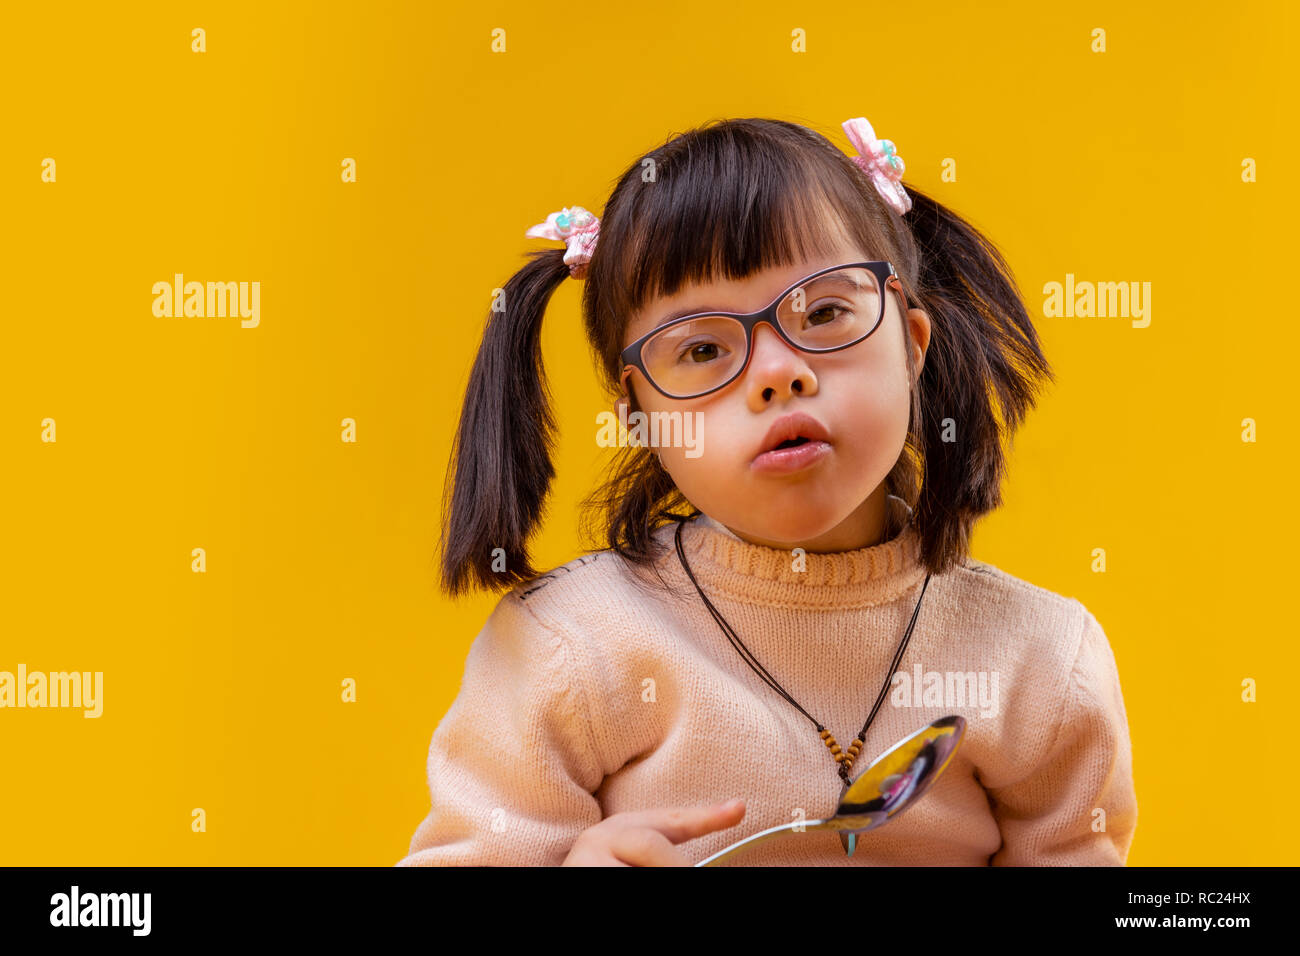 Curious small funky girl holding big metal spoon Stock Photo